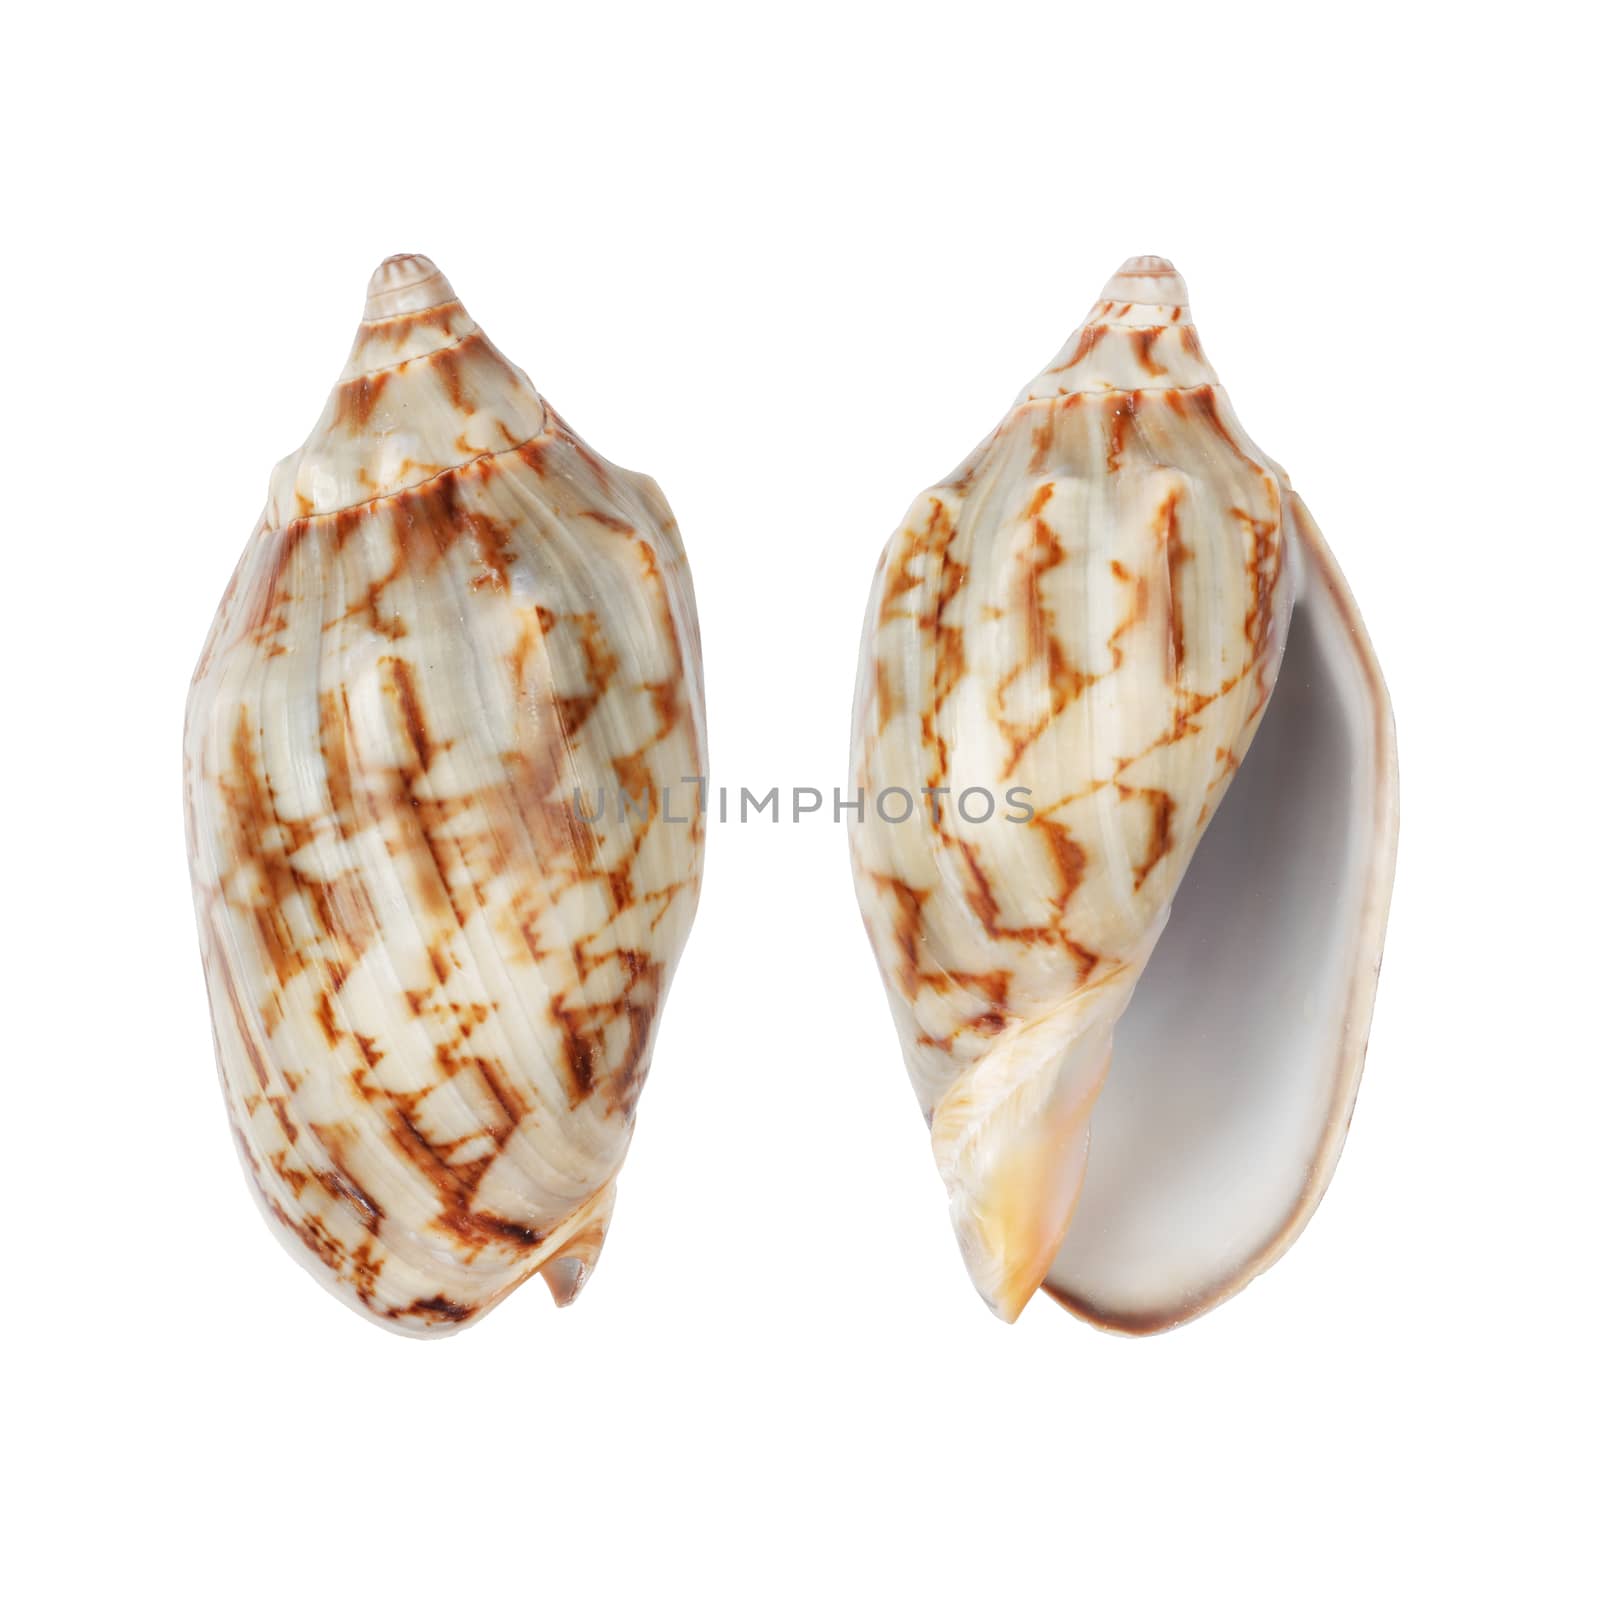 Whelk shells isolated on white with clipping path by VivacityImages